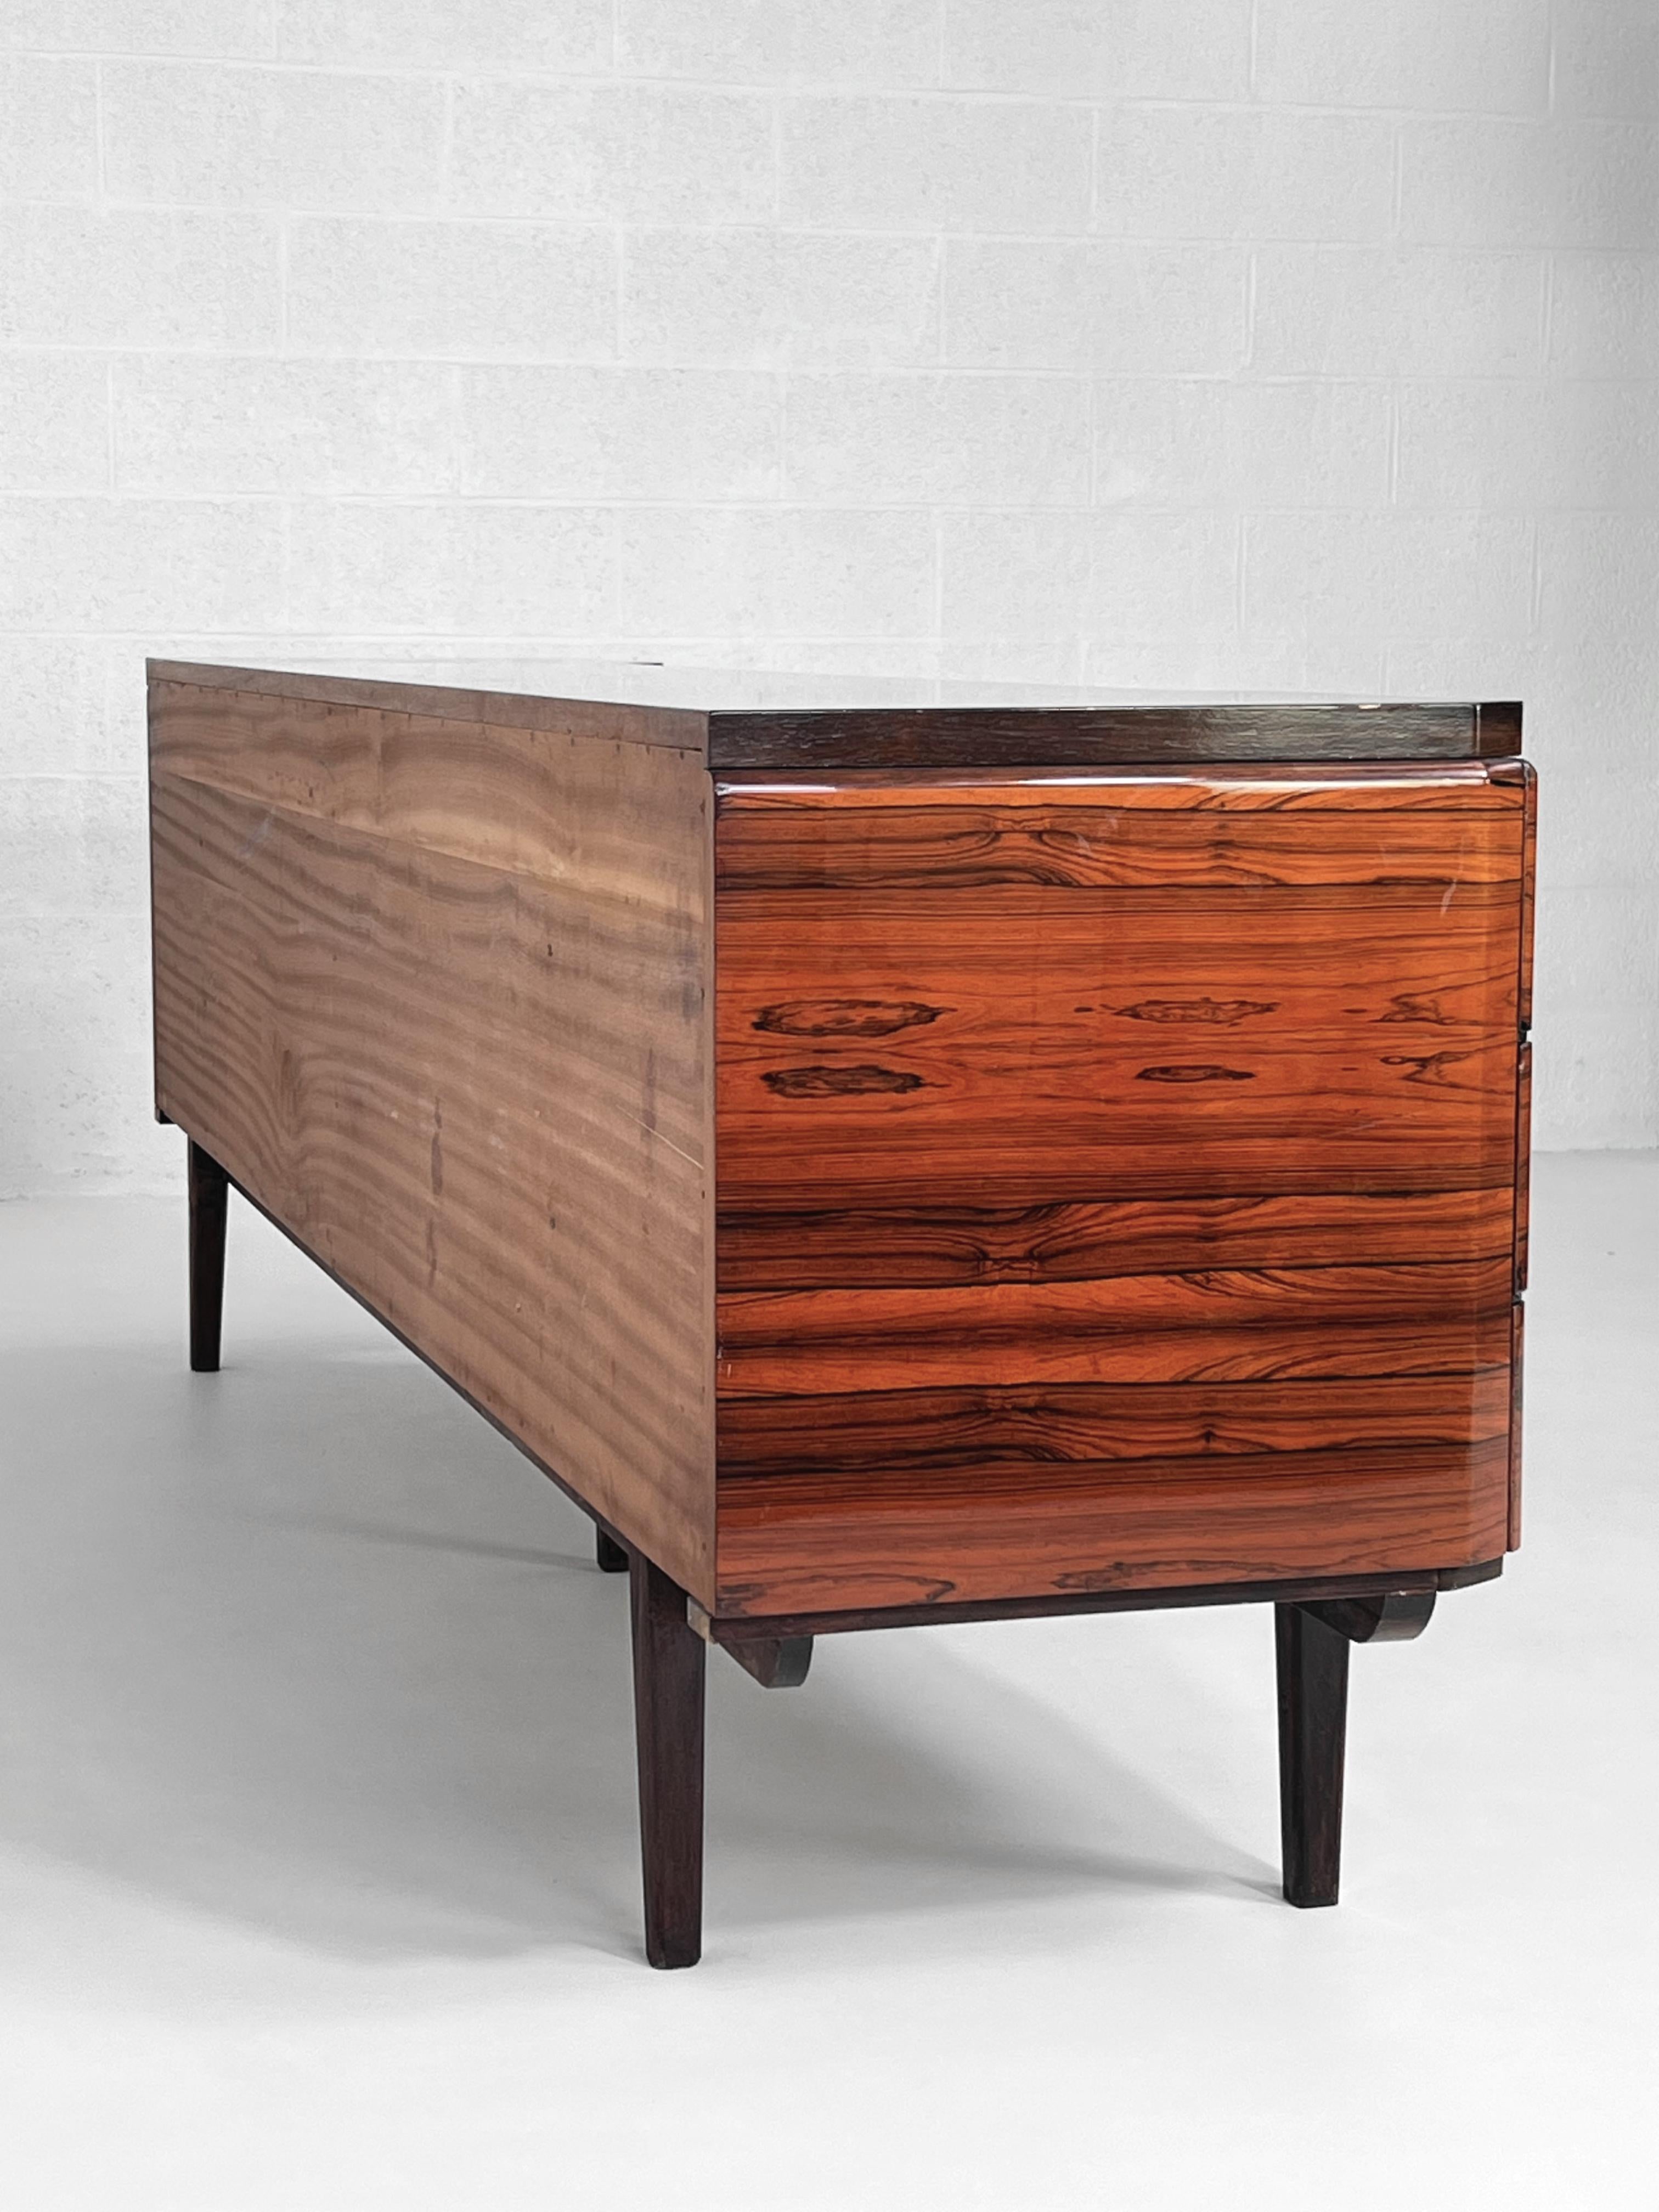 1950 -1960s Italian Design Rosewood Glossy Finishes Curved Sideboard  For Sale 3